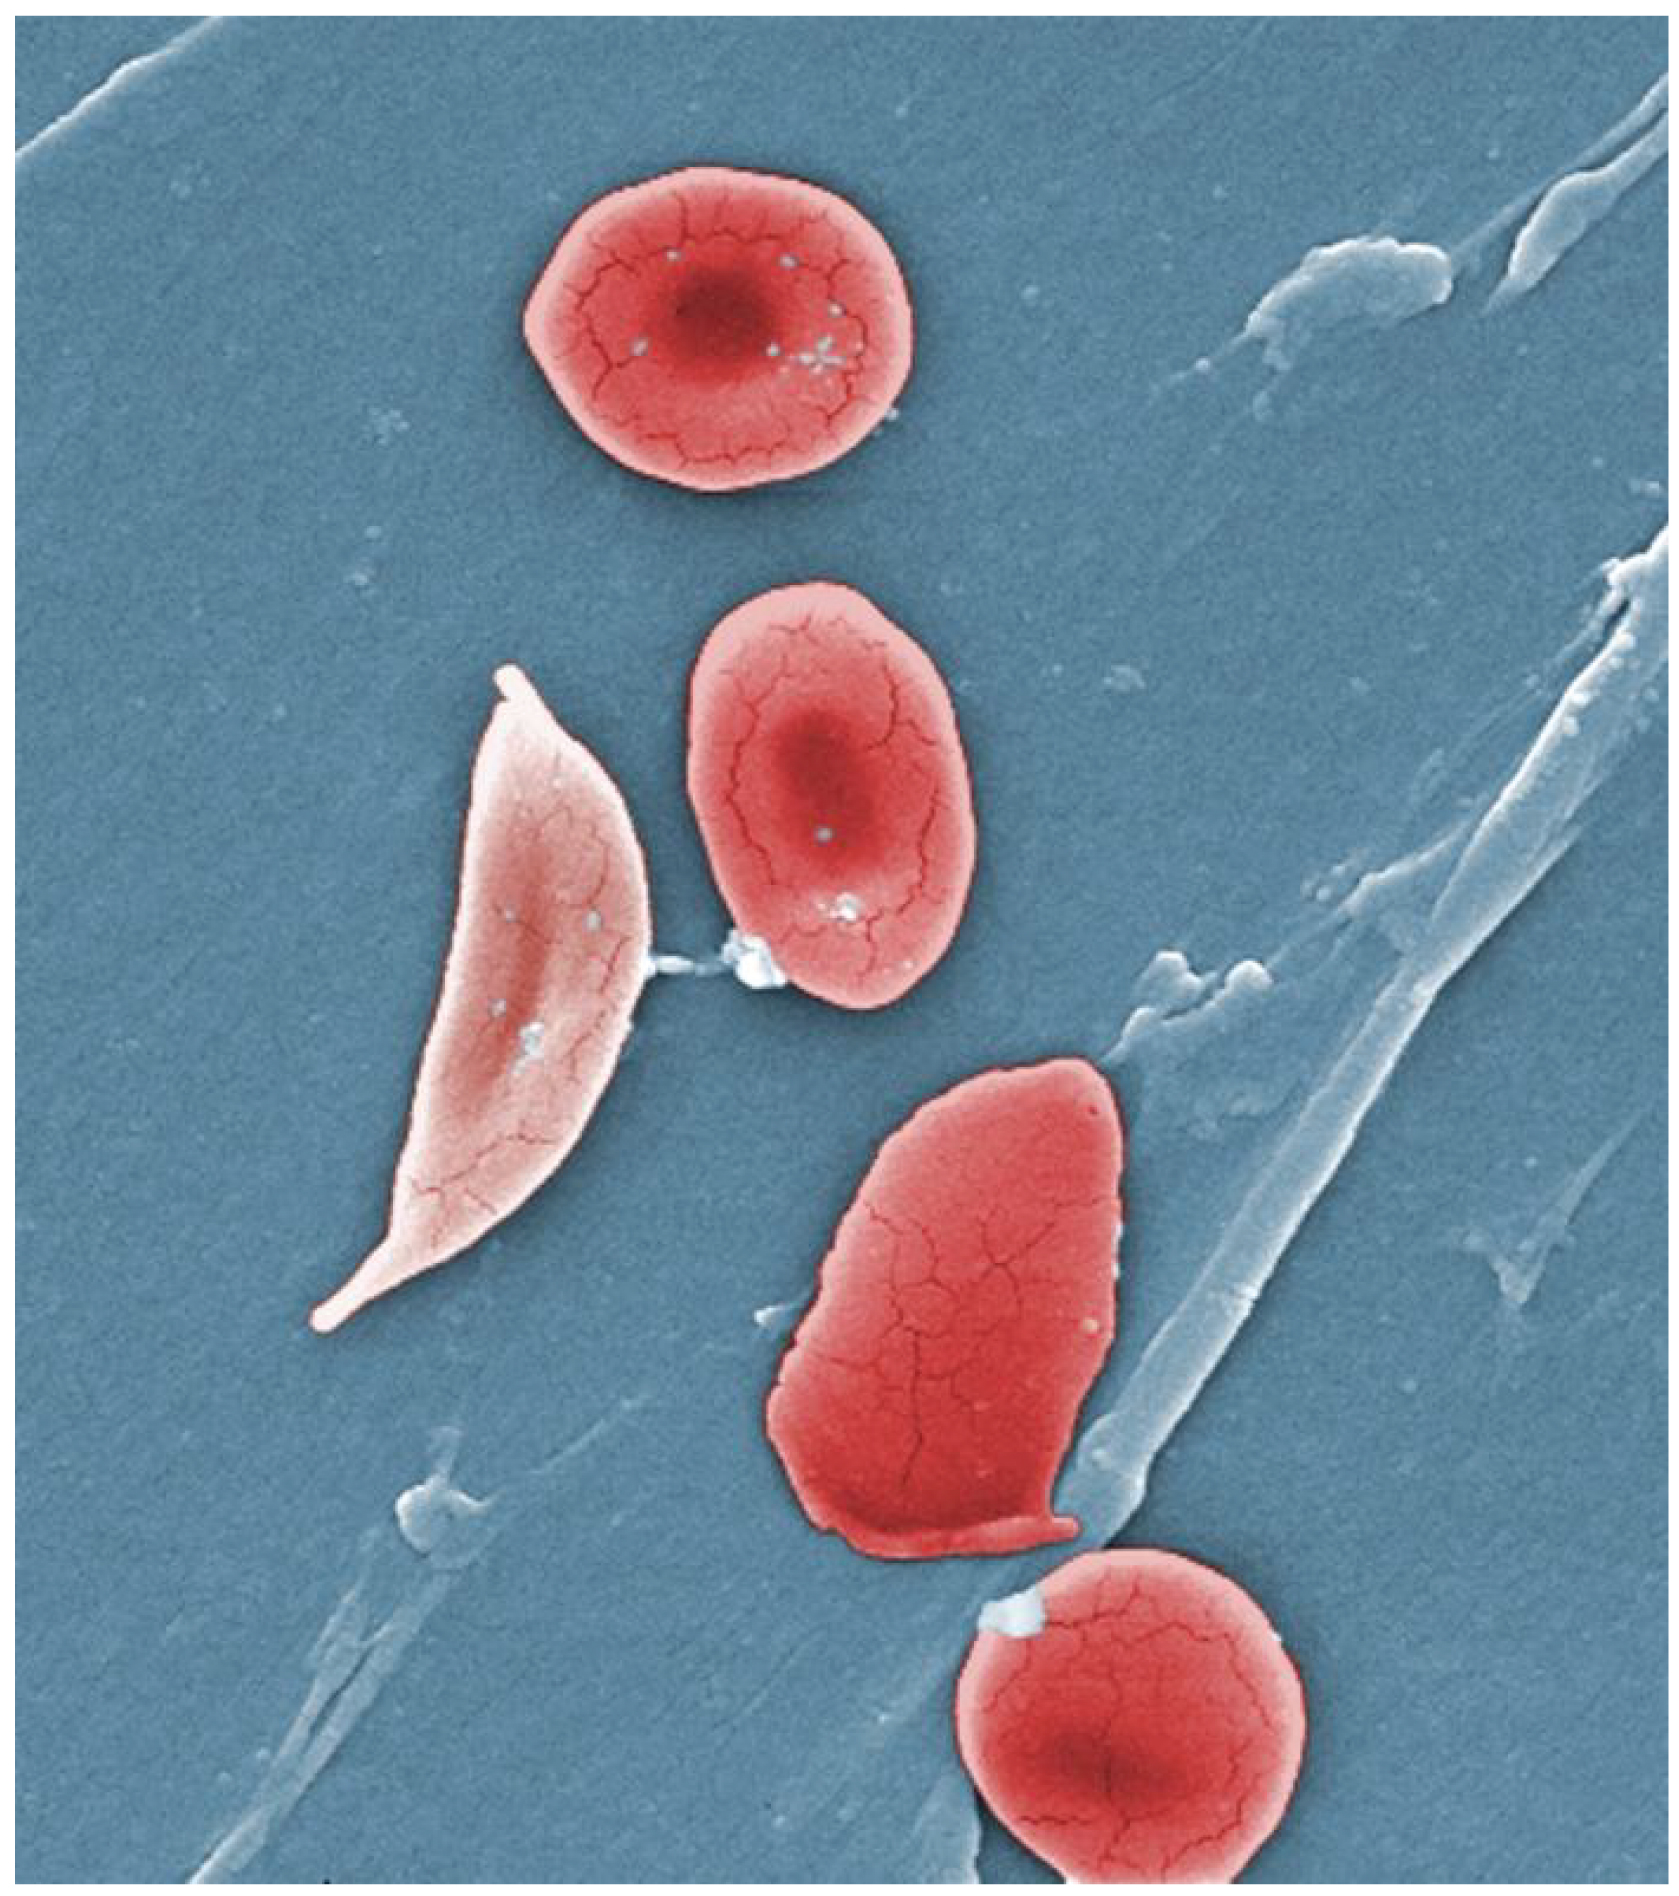 Normally shaped red blood cells described as biconcave discs in view with a sickled red blood cell shaped like a crescent moon.